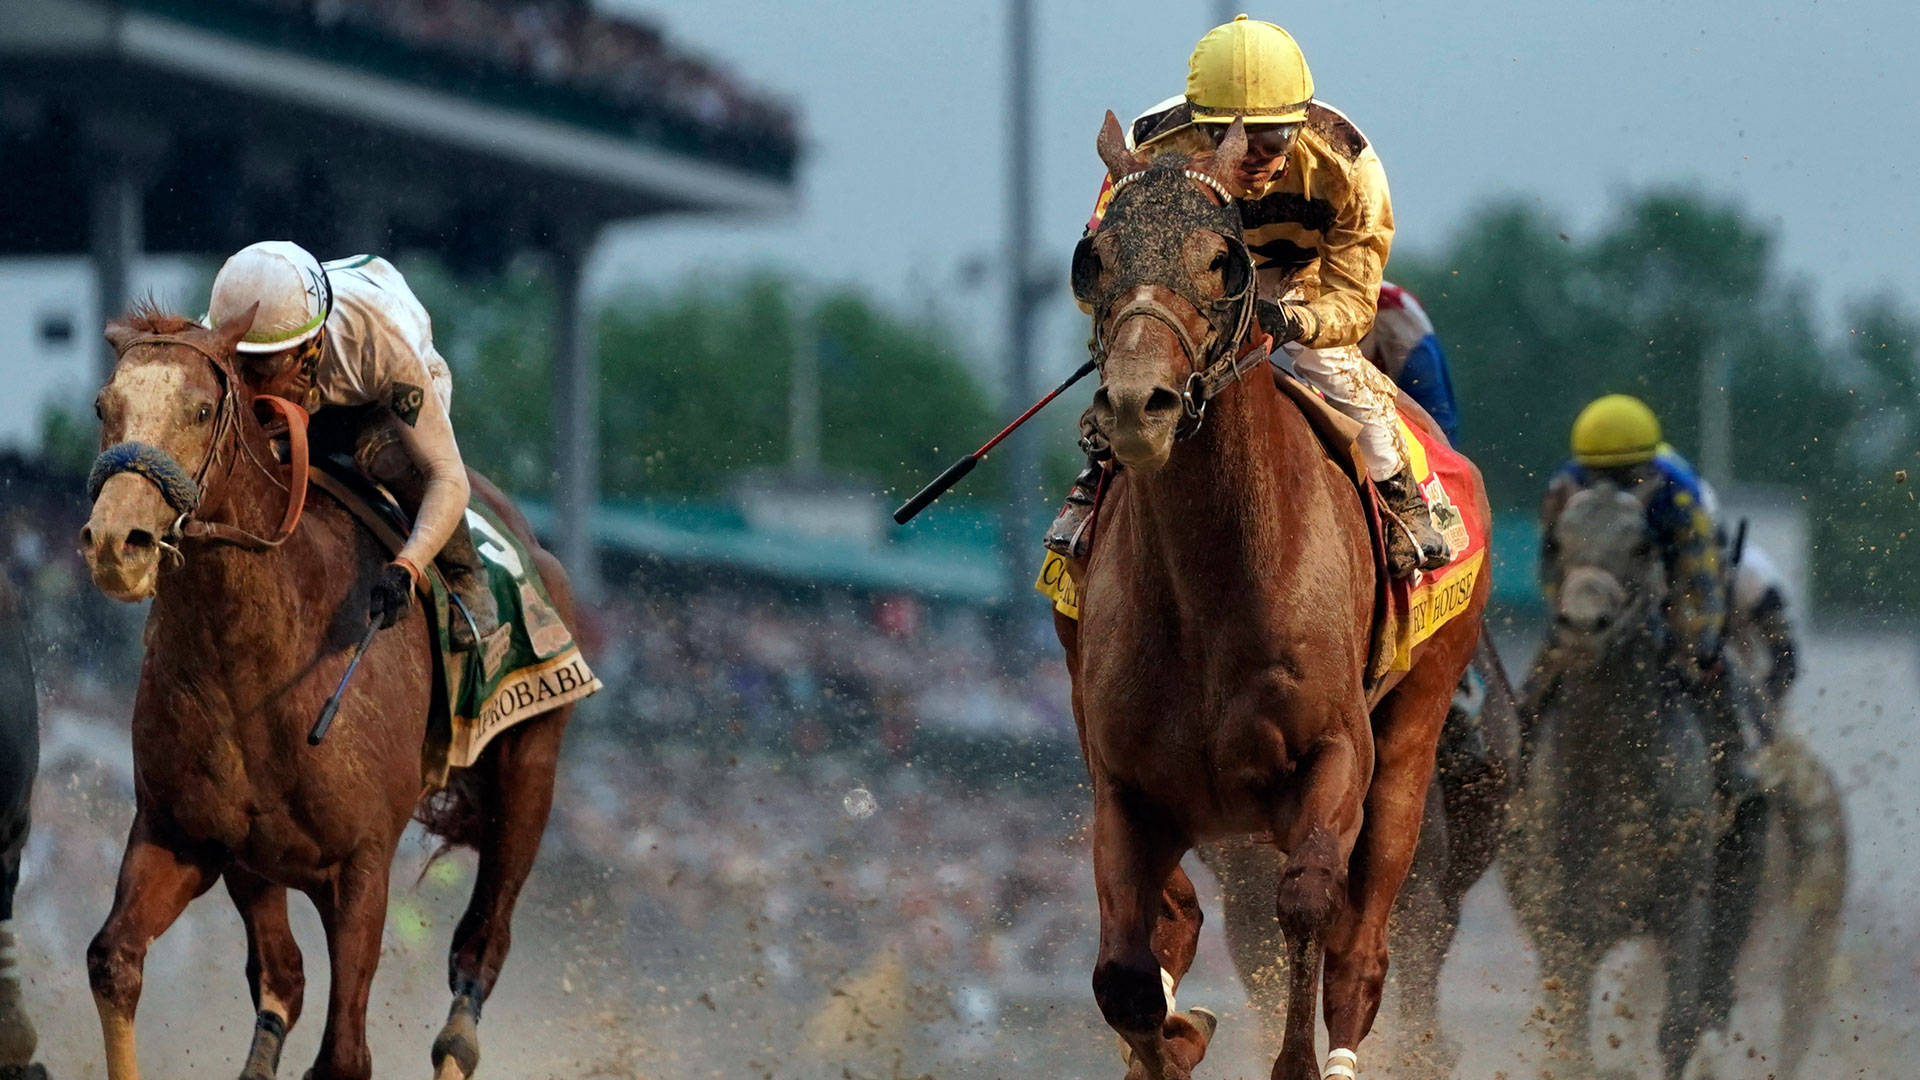 Thrilling Horse Race At The 2019 Kentucky Derby